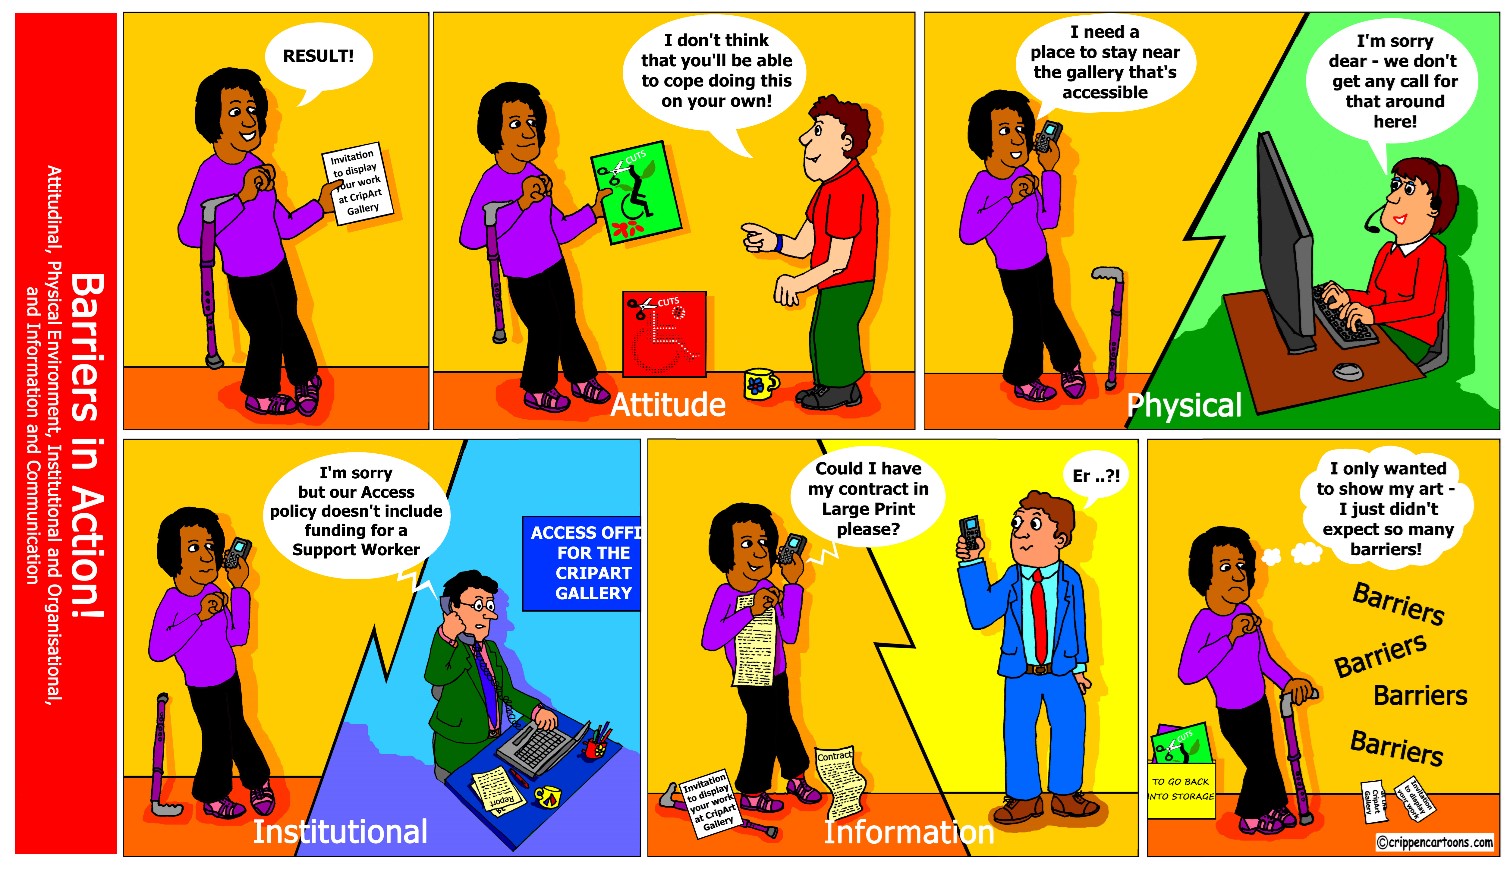 This cartoon strip illustration demonstrates barriers in action: attitudinal, physical, institutional, and informational. In the first square, a person with a cane is holding an invitation to display her artwork at a gallery. In the second square, labeled “Attitude,” another person approaches her, saying “I don’t think that you’ll be able to cope doing this on your own!” In the third square, labeled “Physical,” the artist is on a cell phone, saying “I need a place to stay near the gallery that’s accessible.” The person on the other end replies, “I’m sorry dear-we don’t get any call for that around here!” In the fourth square, labeled “Institutional,” the artist is on the phone again. The person on the other end is shown at a desk with a sign that says “Access Office for the Cripart Gallery.” They say “I’m sorry but our Access policy doesn’t include funding for a Support Worker.” The fifth square, labeled “Information” shows the artist asking a gallery staff, “Could I have my contract in Large Print please?” The gallery staff says “Er…?!” In the sixth and final square, the artist has a thought bubble above her head that reads, “I only wanted to show my art-I just didn’t expect so many barriers!” Her invitation to display artwork is torn in half on the ground.